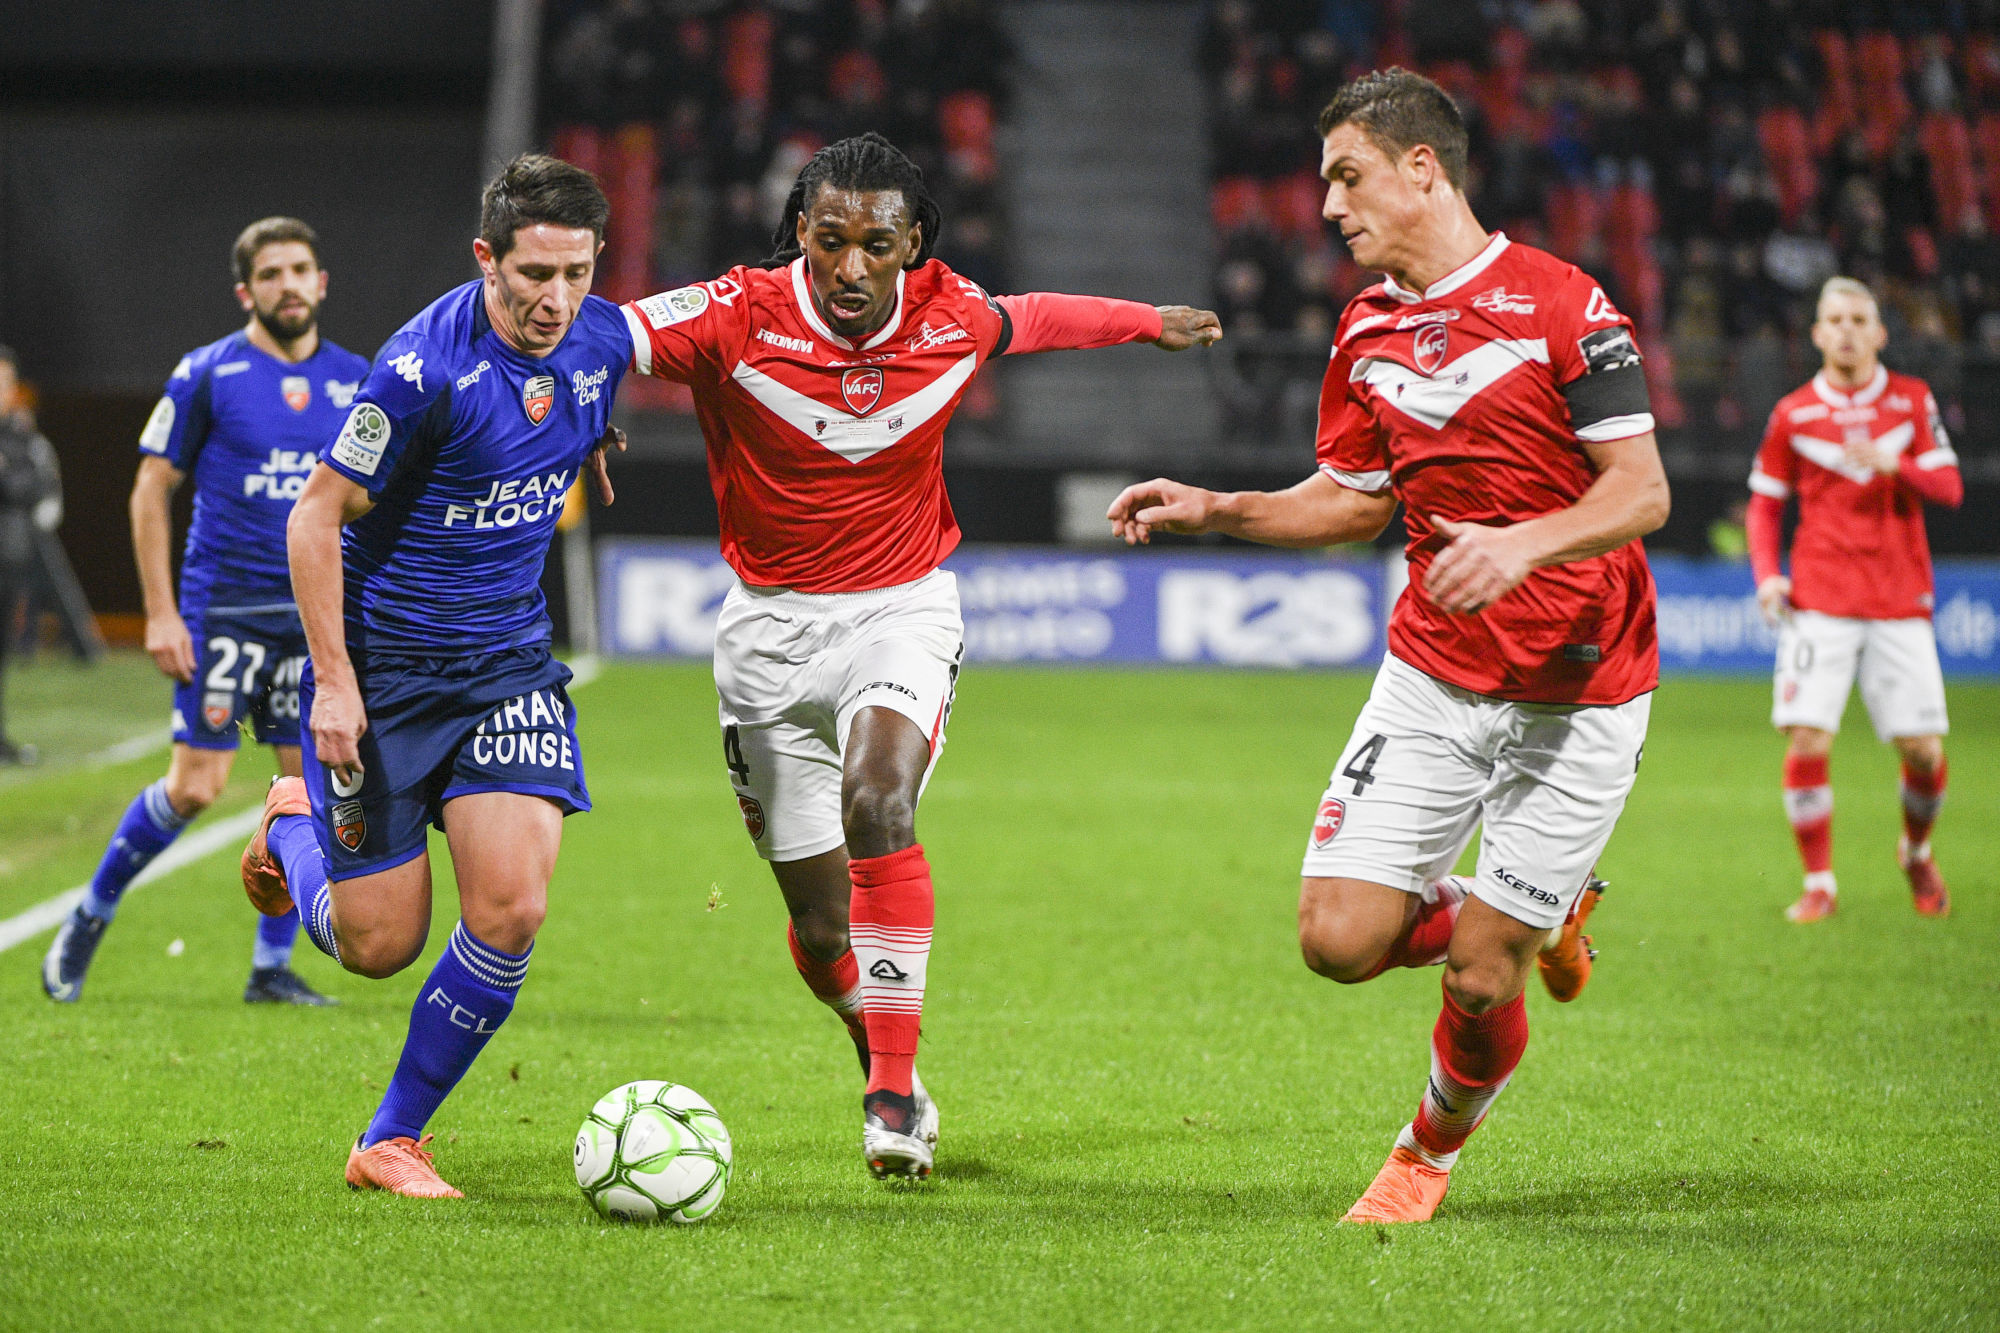 Jimmy CABOT of Lorient, and Lilian BRASSIER and Joffrey CUFFAUT of Valenciennes during the Ligue 2 match between Valenciennes and Lorient at Stade du Hainaut on December 20, 2019 in Valenciennes, France. (Photo by Aude Alcover/Icon Sport) - Stade du Hainaut - Valenciennes (France)